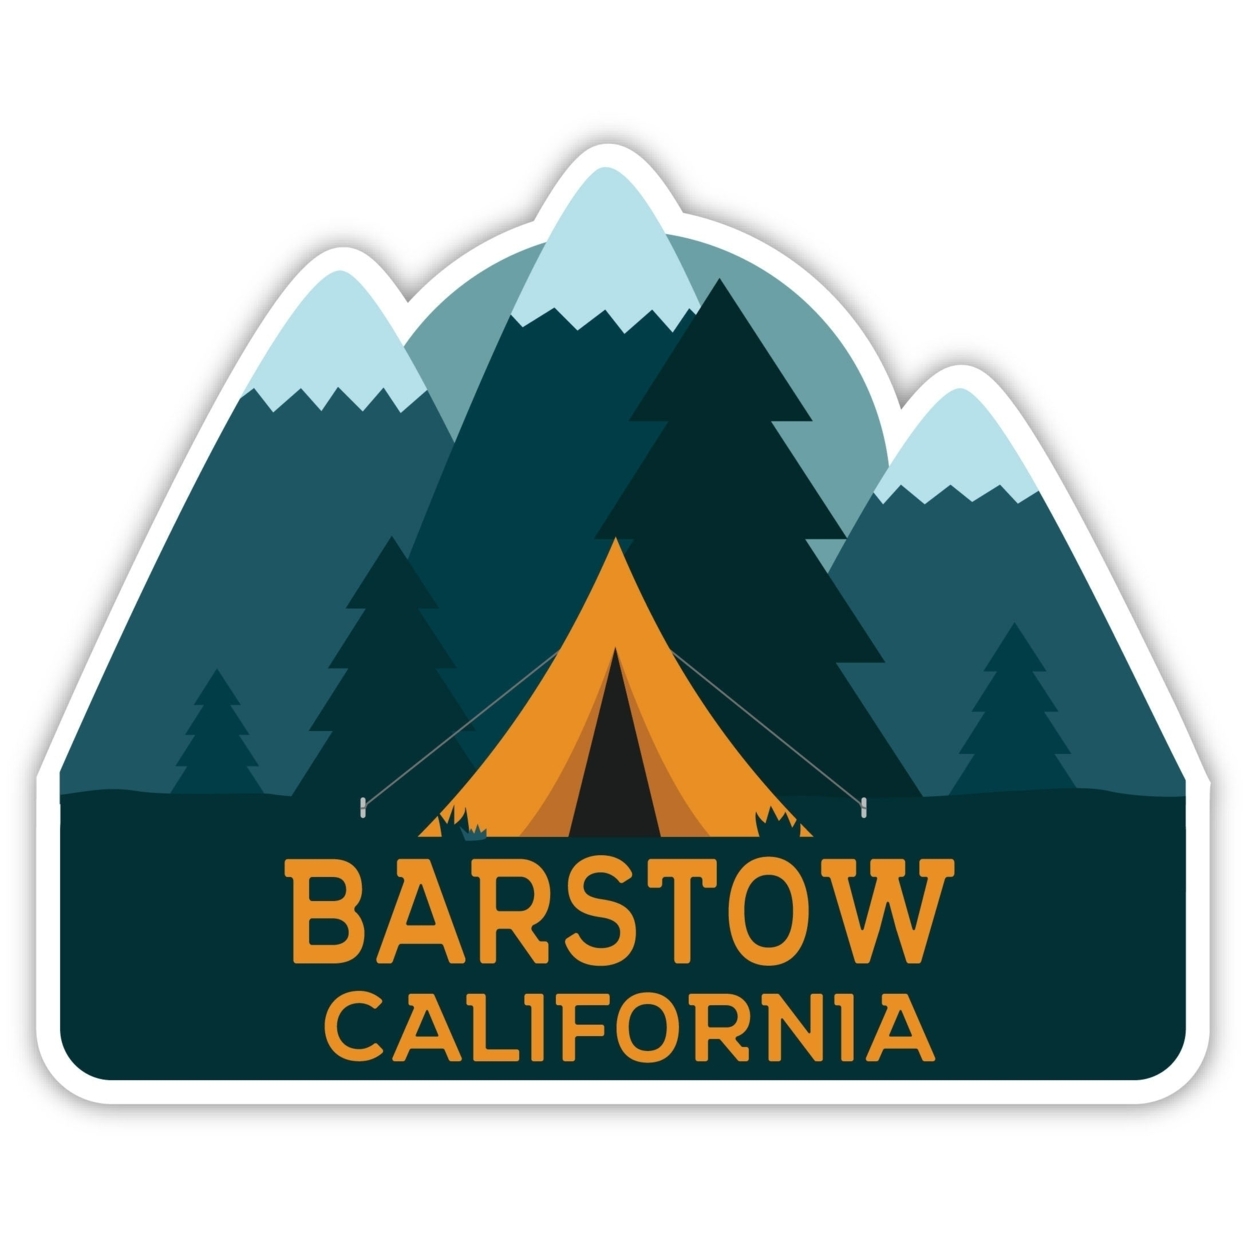 Barstow California Souvenir Decorative Stickers (Choose Theme And Size) - 4-Pack, 10-Inch, Tent